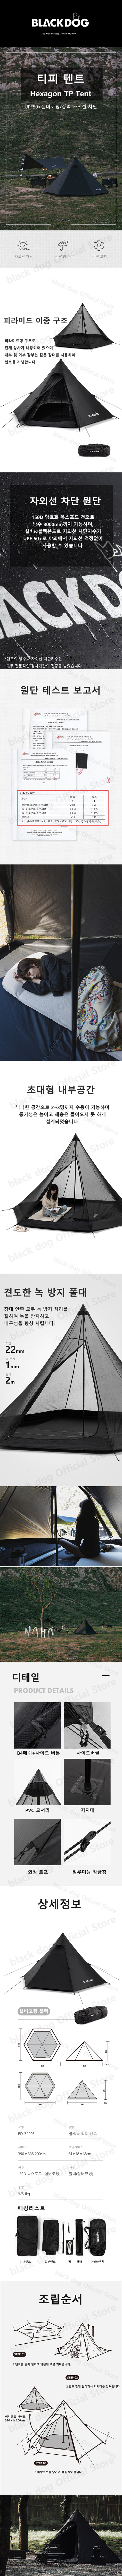 Cheap Goat Tents Blackdog Black Pyramid Tent Outdoor Camping Park Canopy Sun Protection Rustproof Windproof Tent 3 People Tent